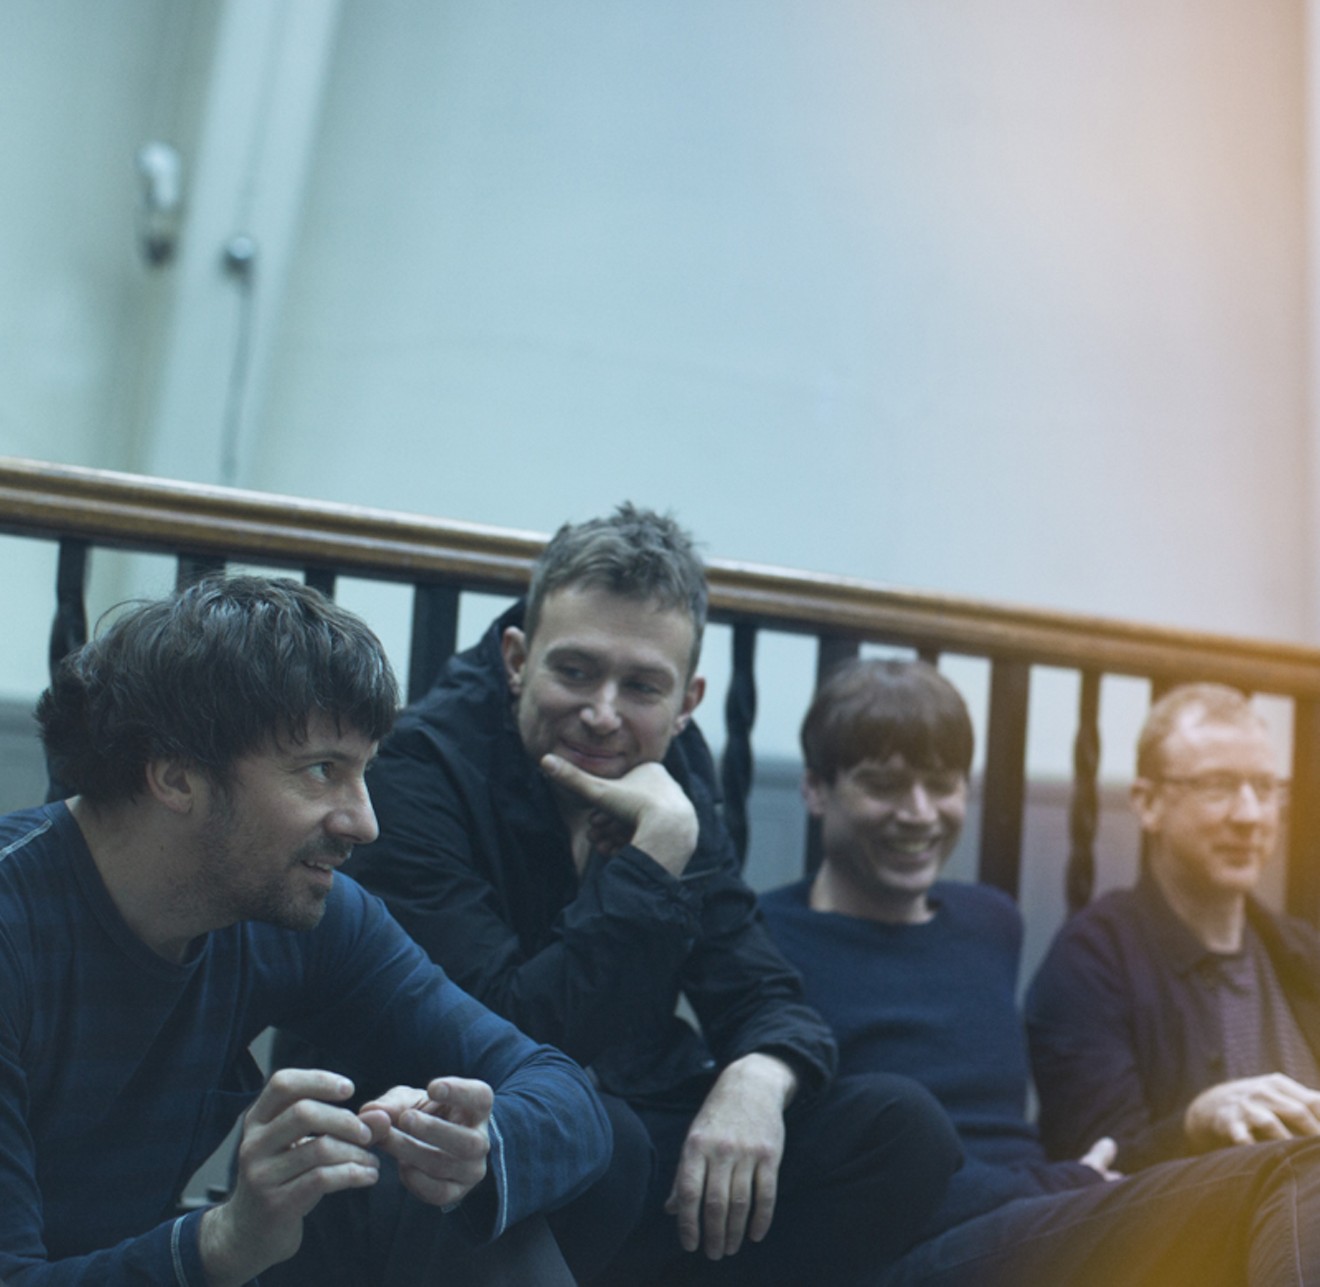 Blur haven't played Houston in more than 20 years.